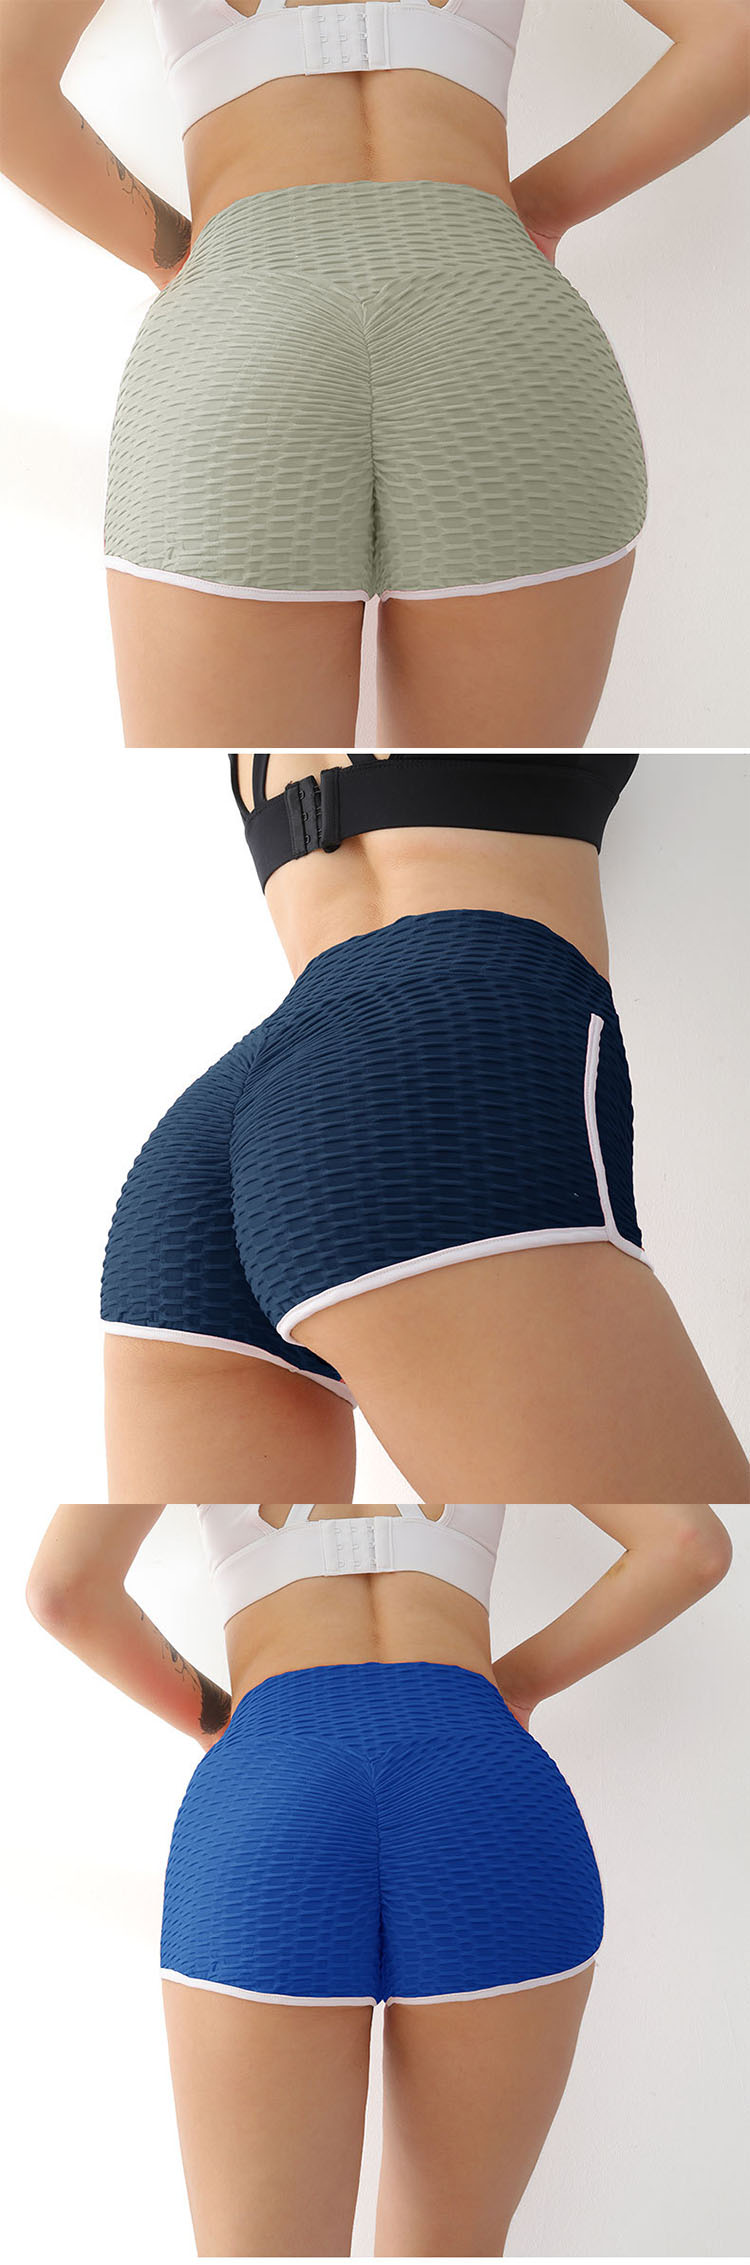 The new fit high-waist design, the hidden meat looks thin, slender and tall.